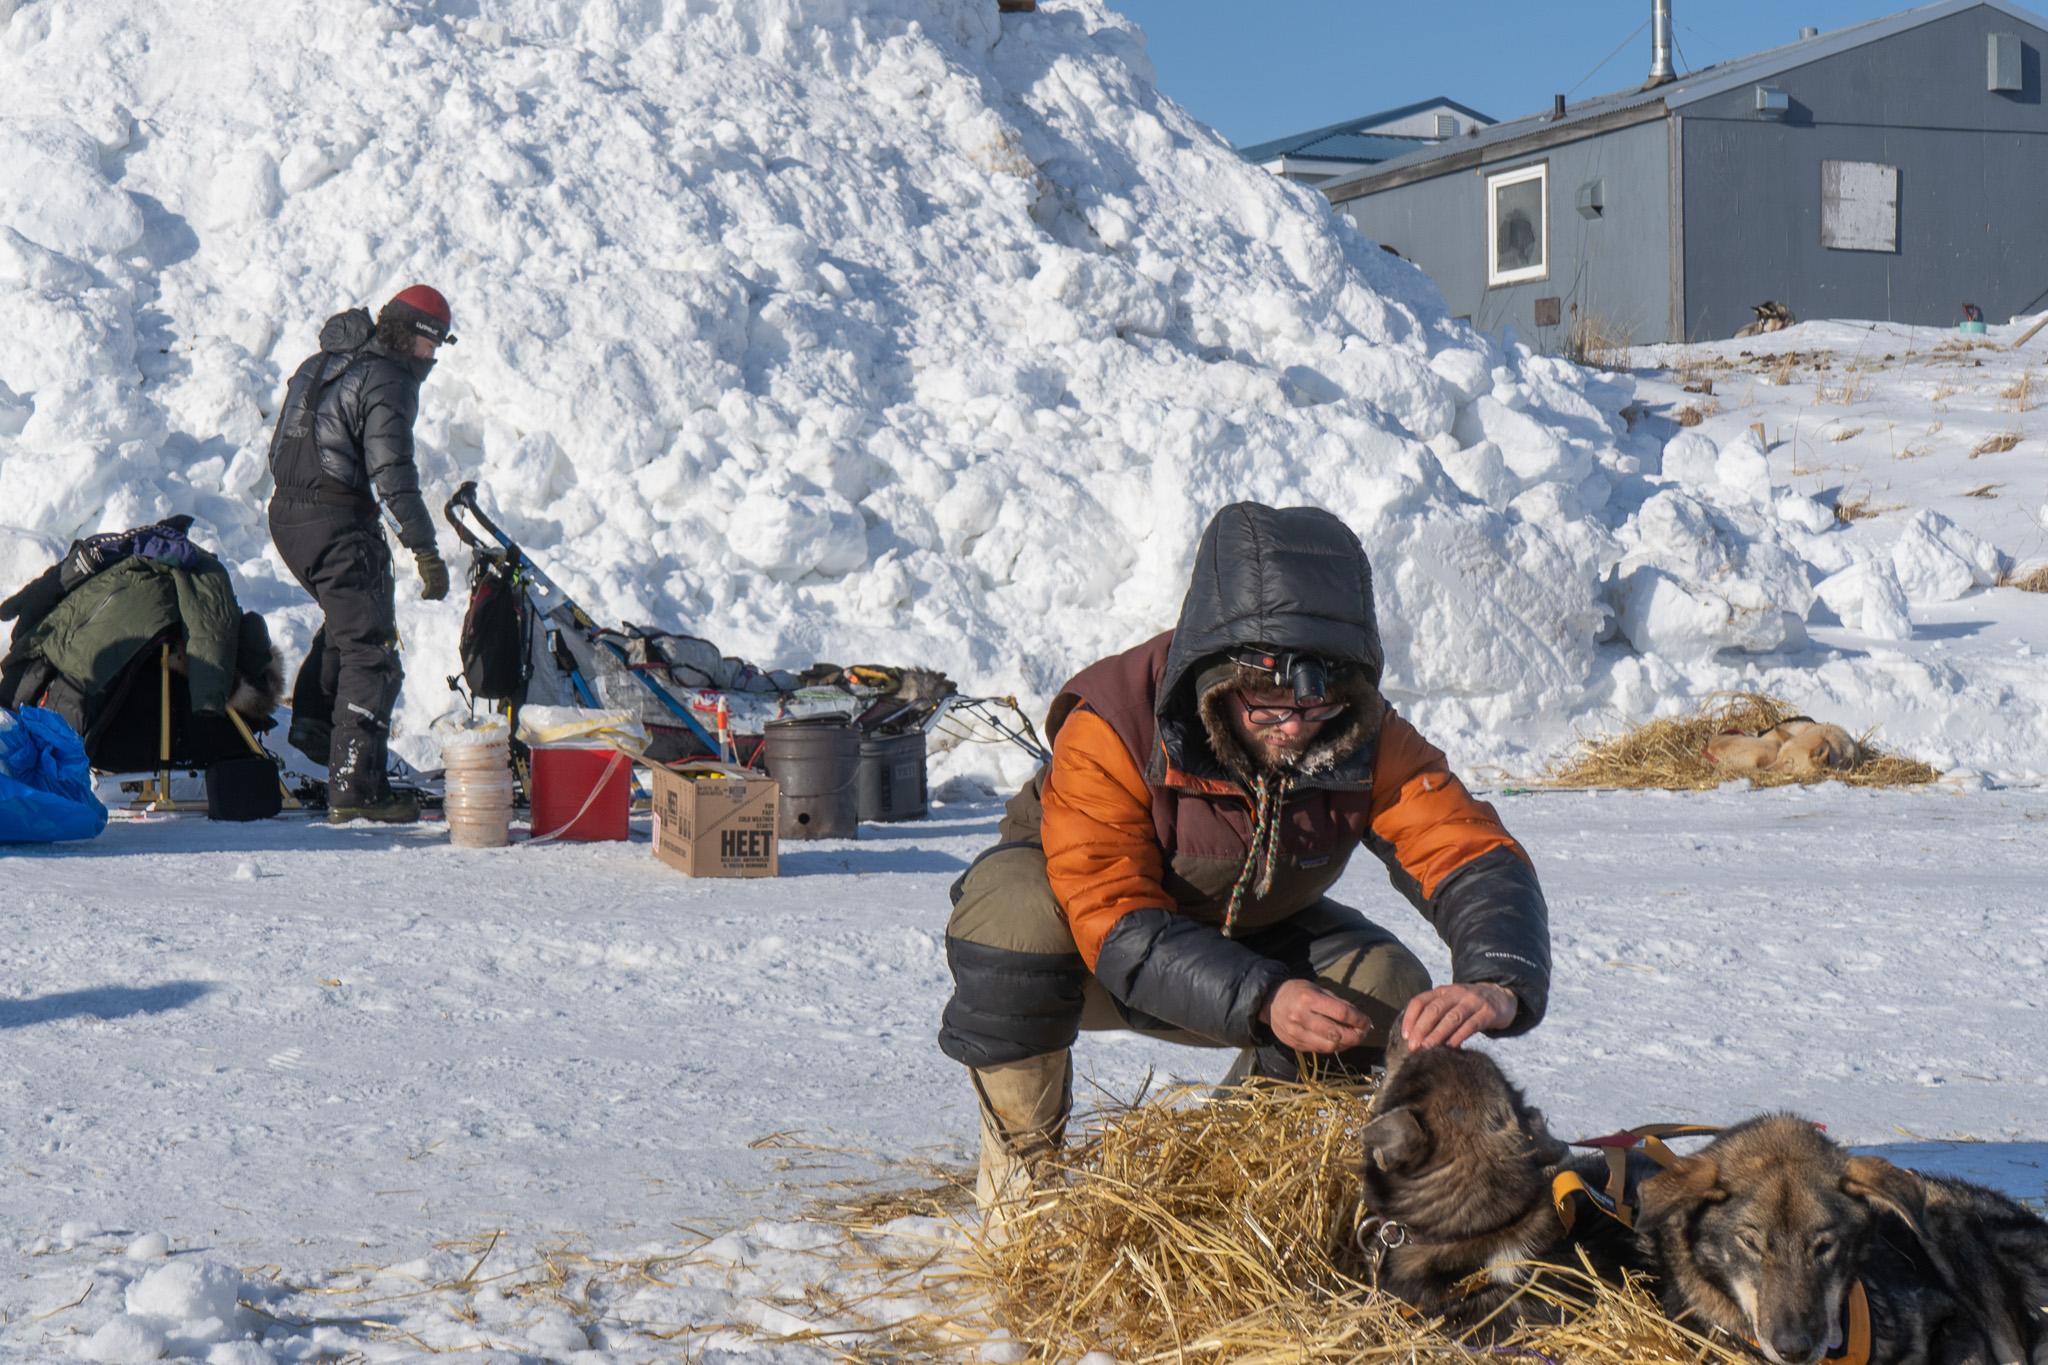 A person puts food in the mouth of his dog while another person stands on a dog sled in a snowy scene